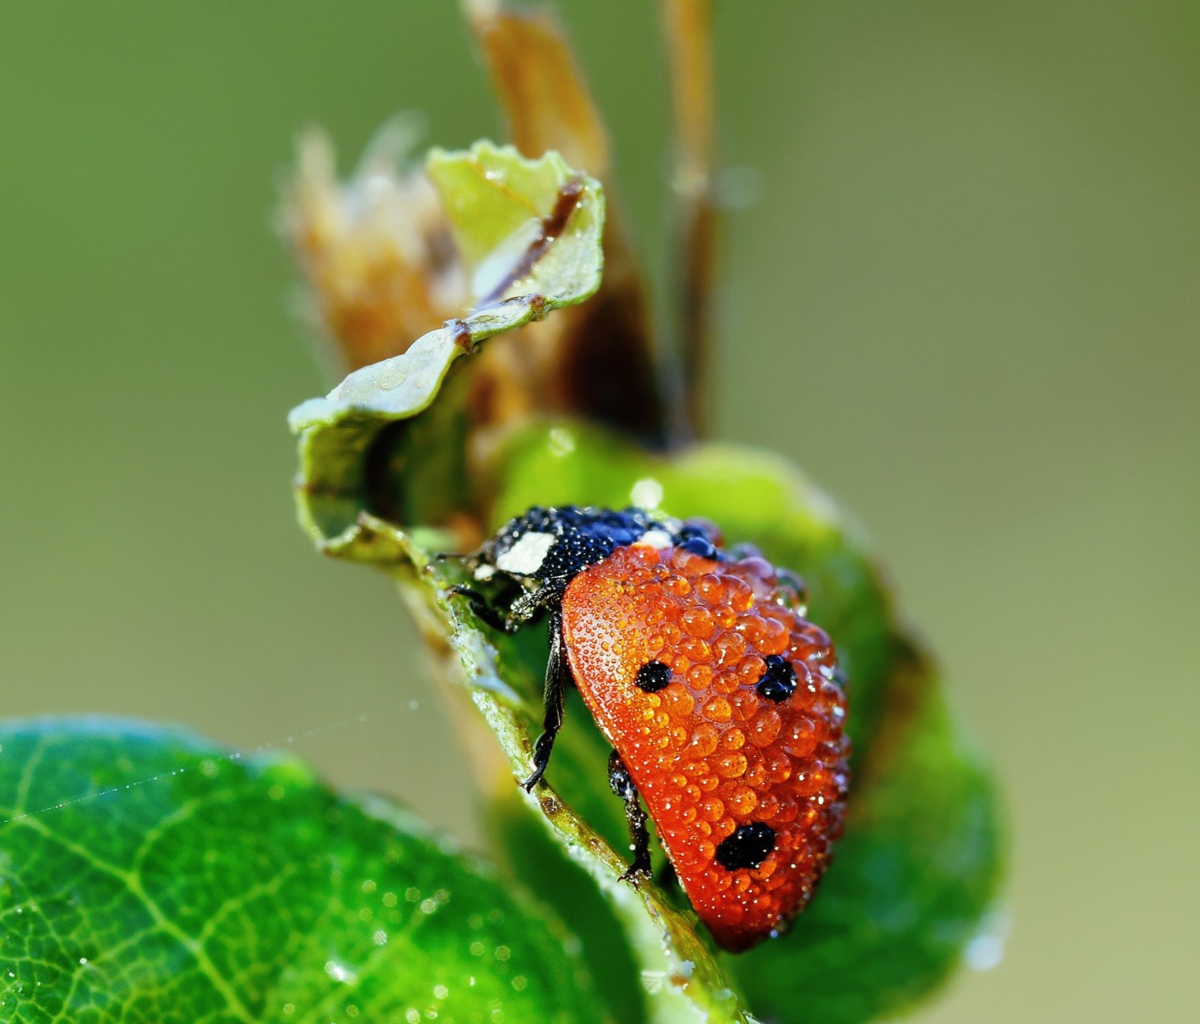 Ladybug Covered With Dew Drops wallpaper 1200x1024